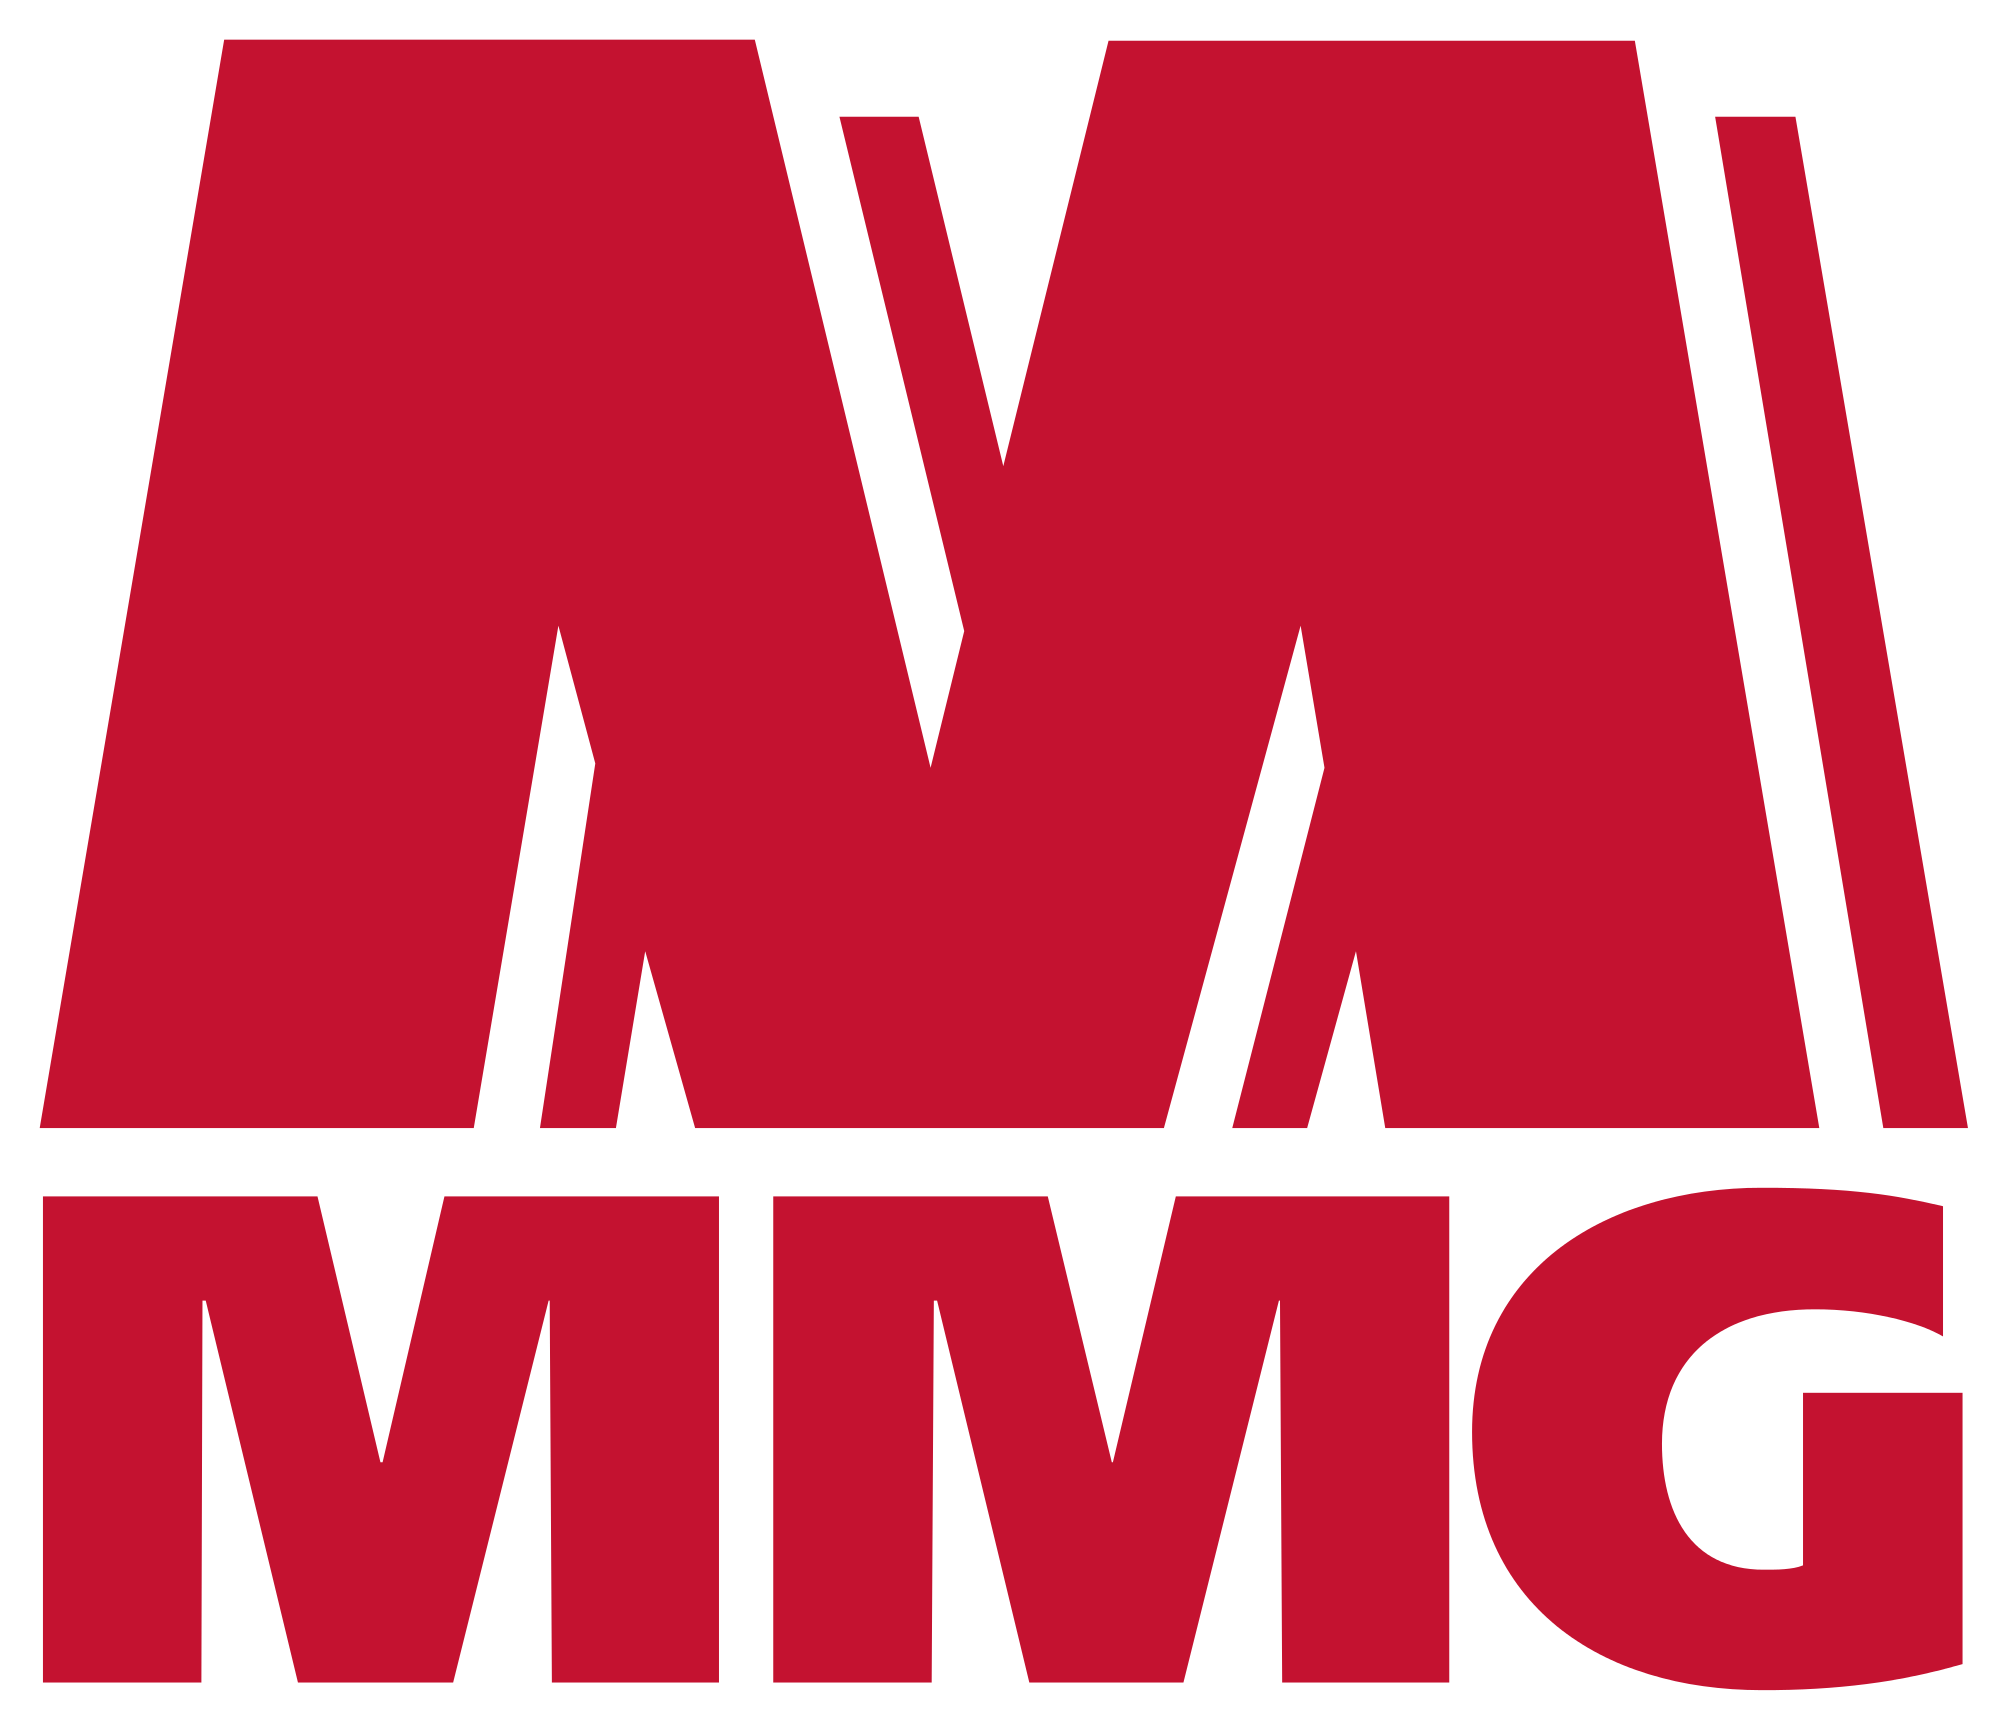 MMG Logo - File:Minerals and Metals Group (MMG) logo.svg - Wikimedia Commons